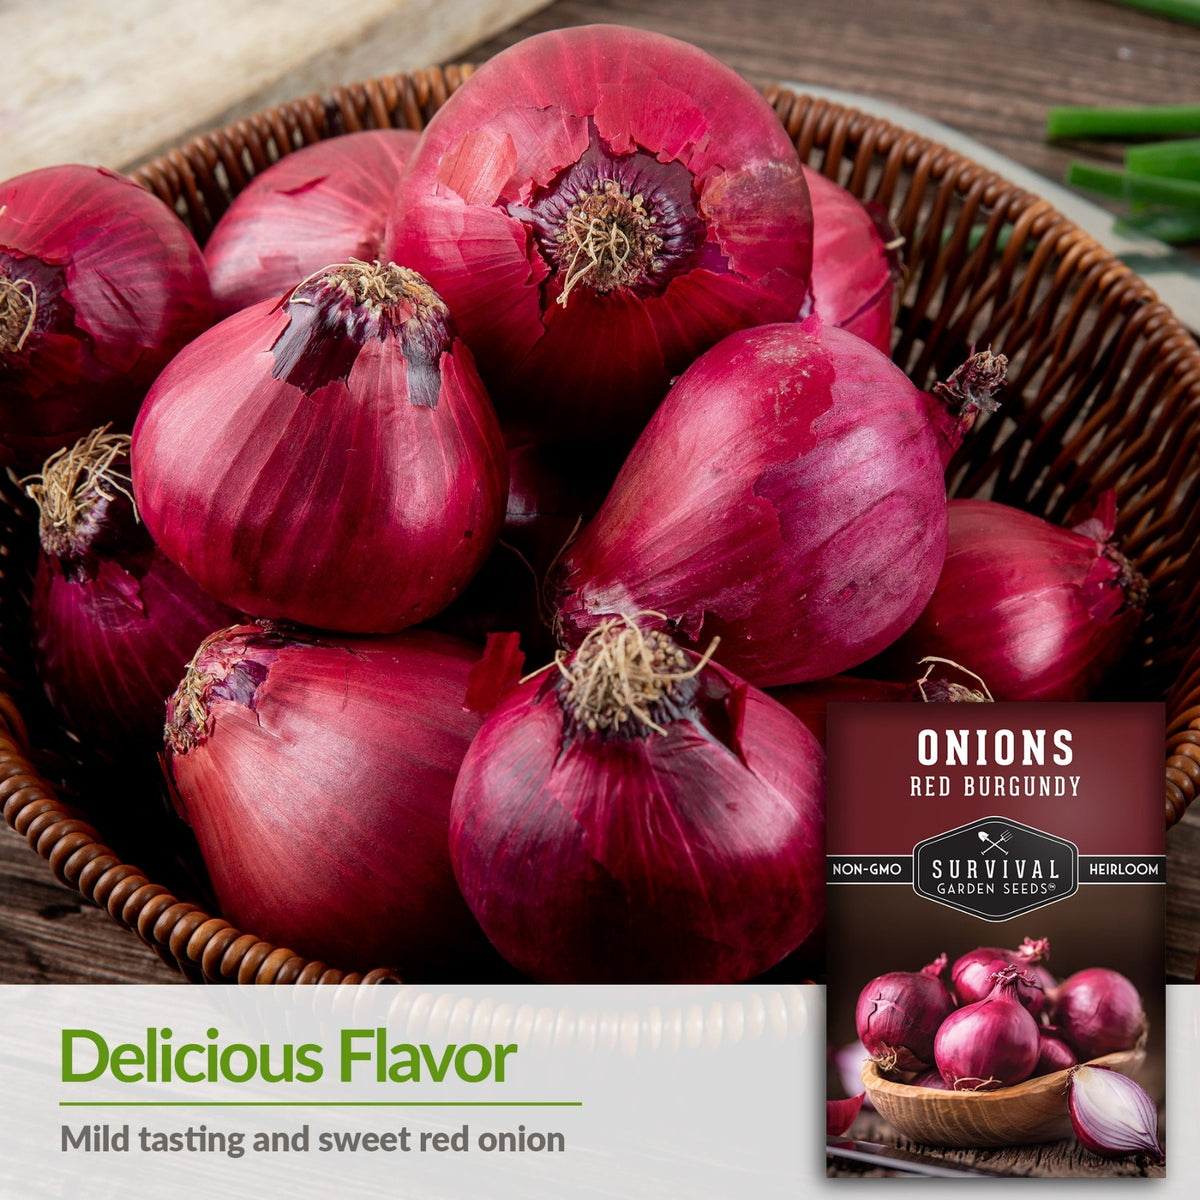 Red Burgundy is a mild and sweet red onion